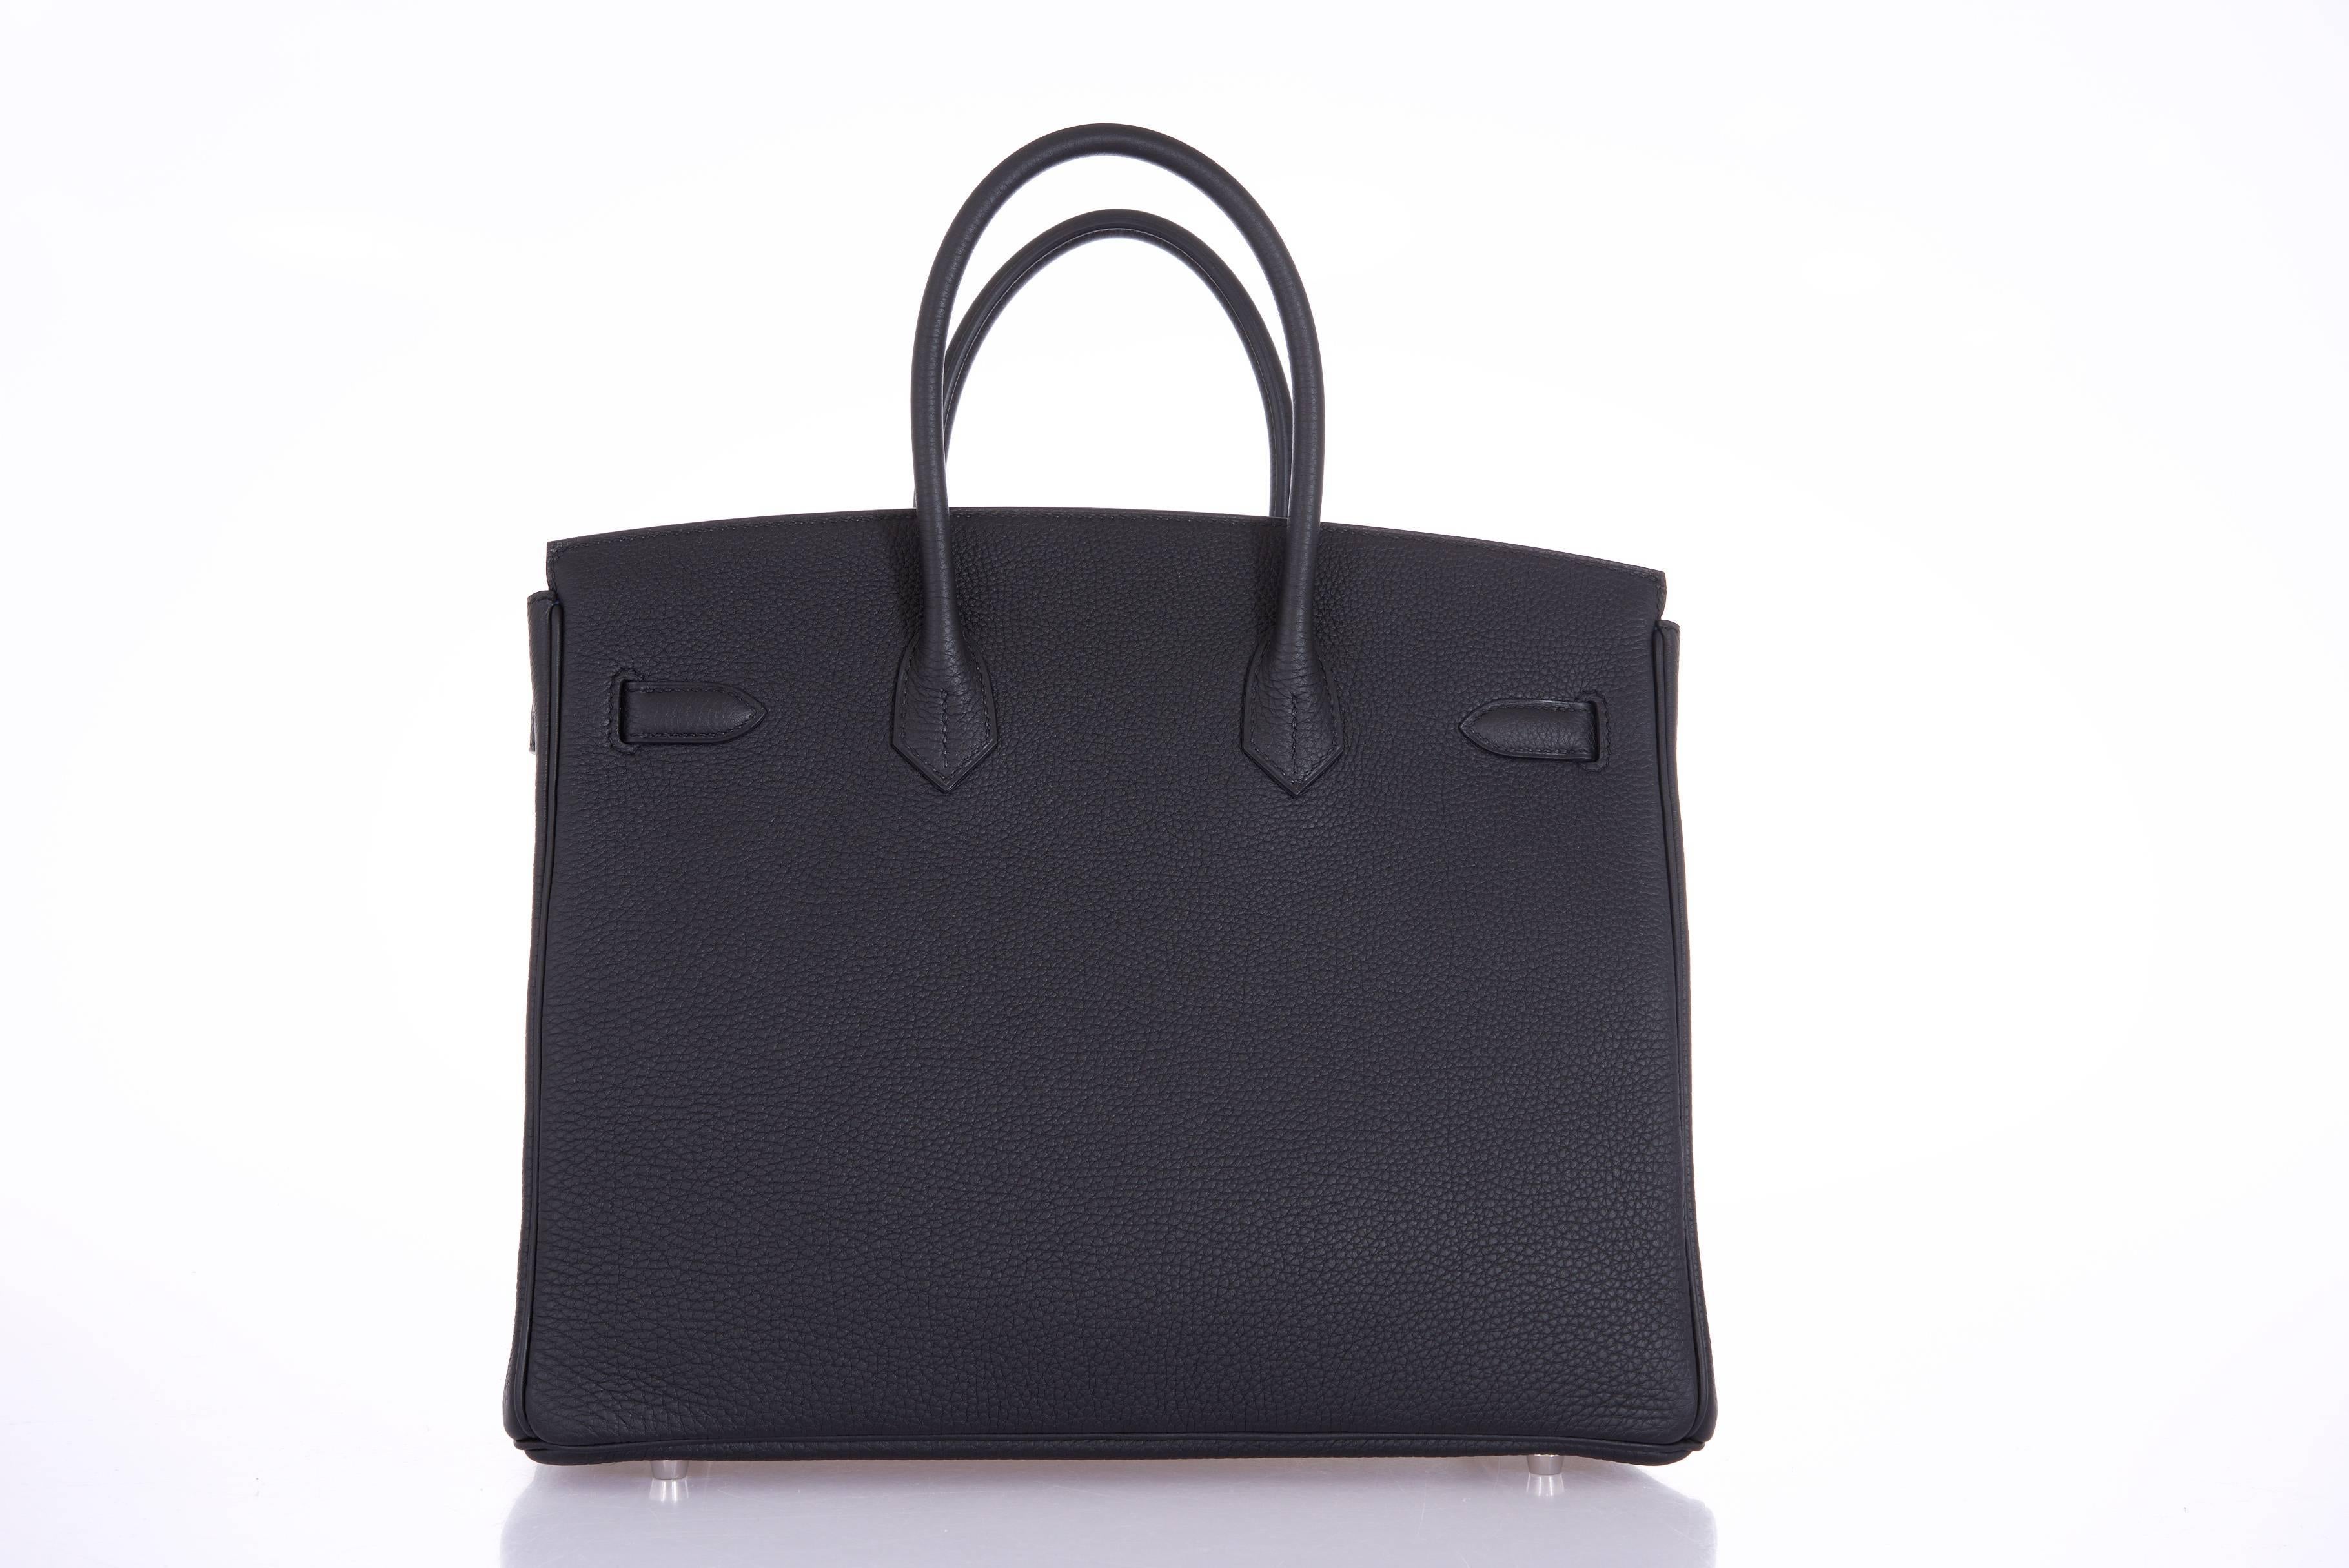 Hermes 35cm Birkin Bag Black & Blue Agate interior togo leather PHW

new Condition

Hardware: Palladium 
Country Of Origin: France
Color: Black/blue
Accompanied By: Care Booklet; Dust Bag Plastic Raincoat Box
Closure: Clasp
Height (In Inches):